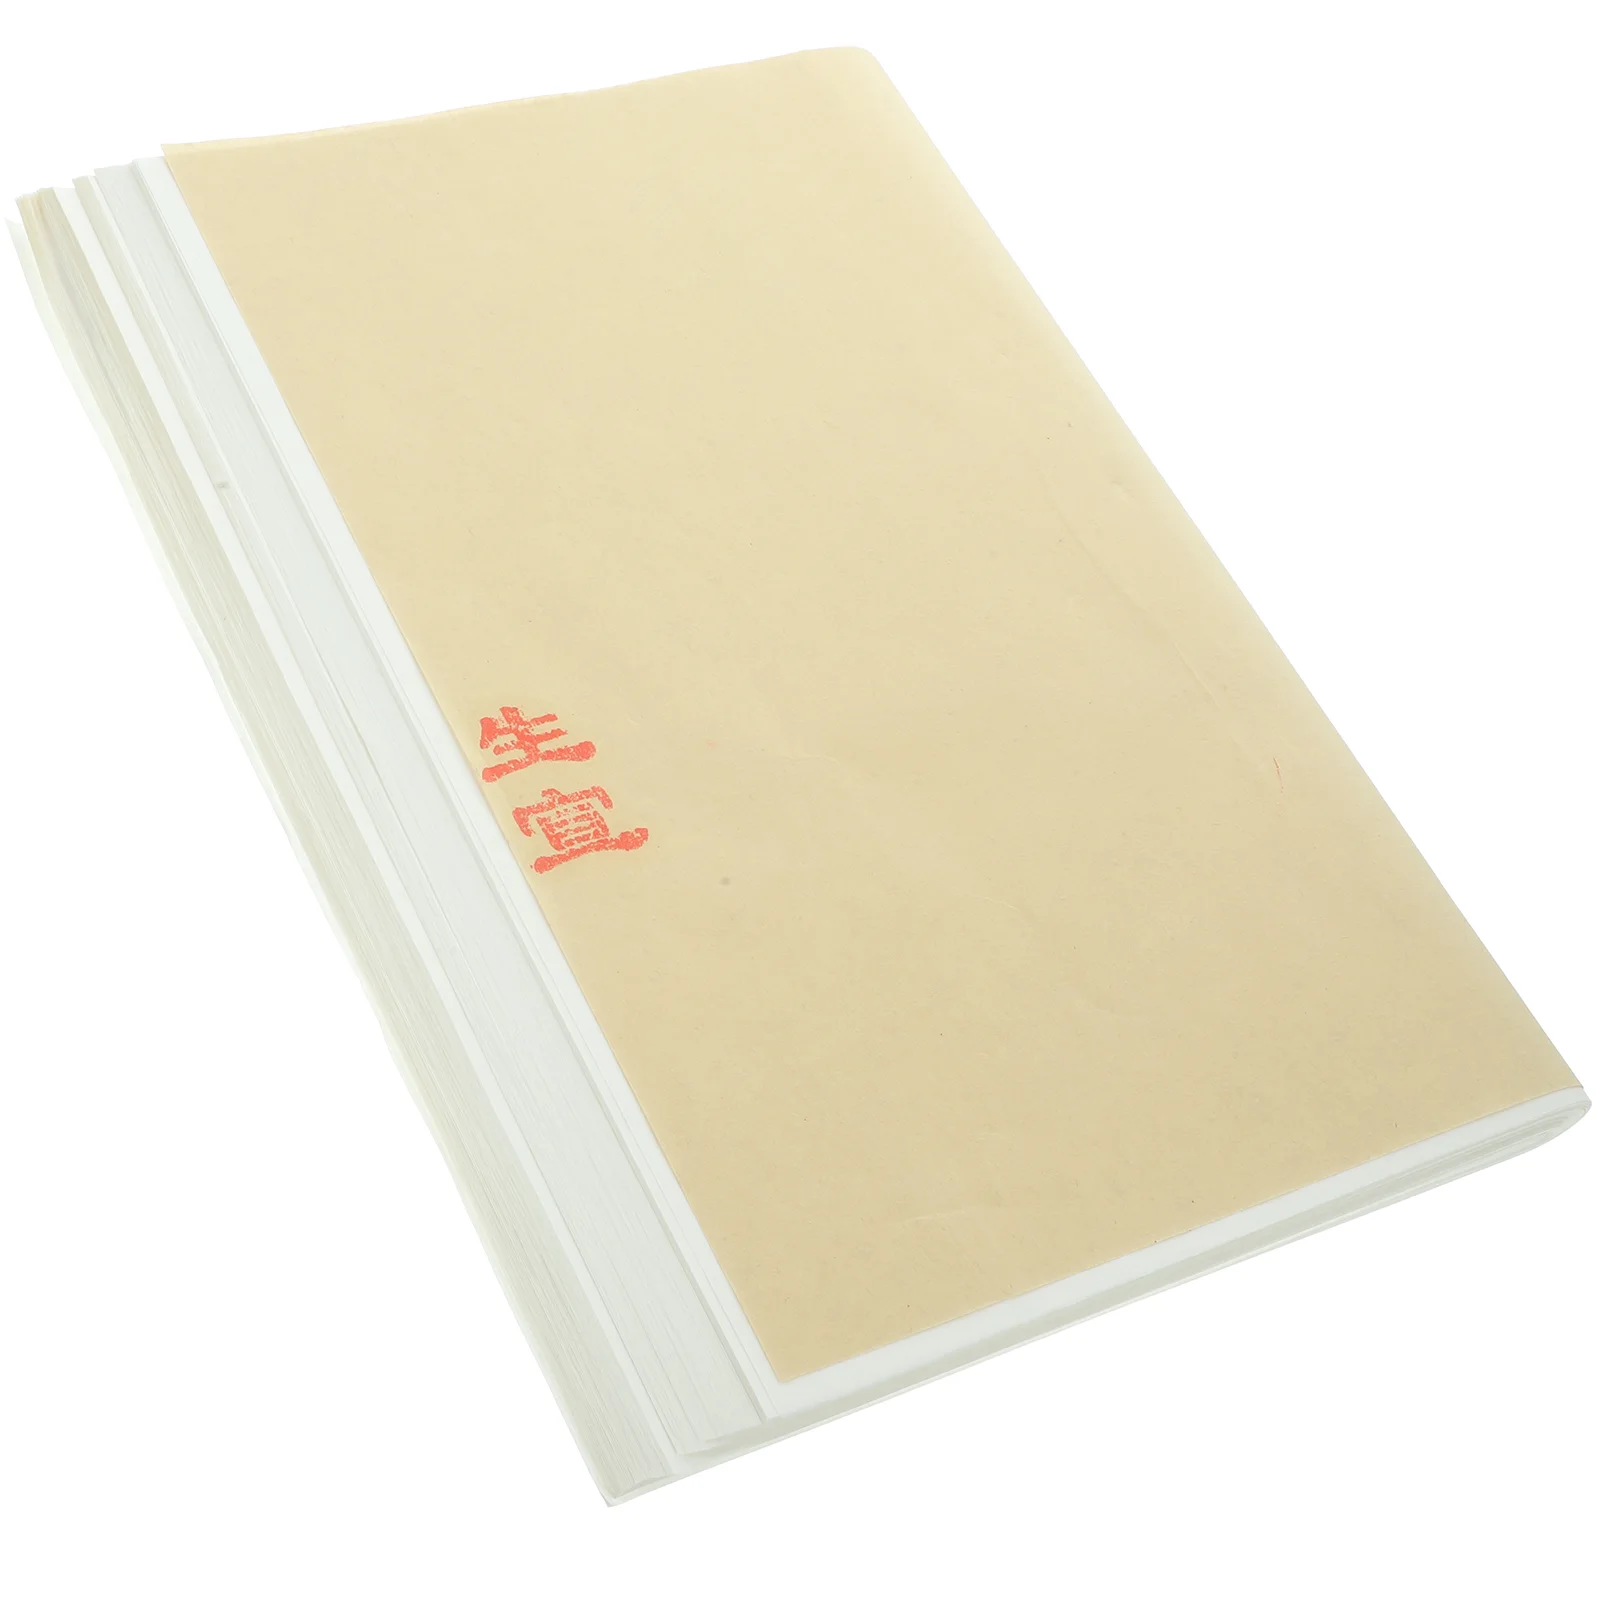 

100 Sheets Raw Rice Cardboard Painting Paper Writing DIY for Decoupage Reliable Drawing Brush Calligraphy